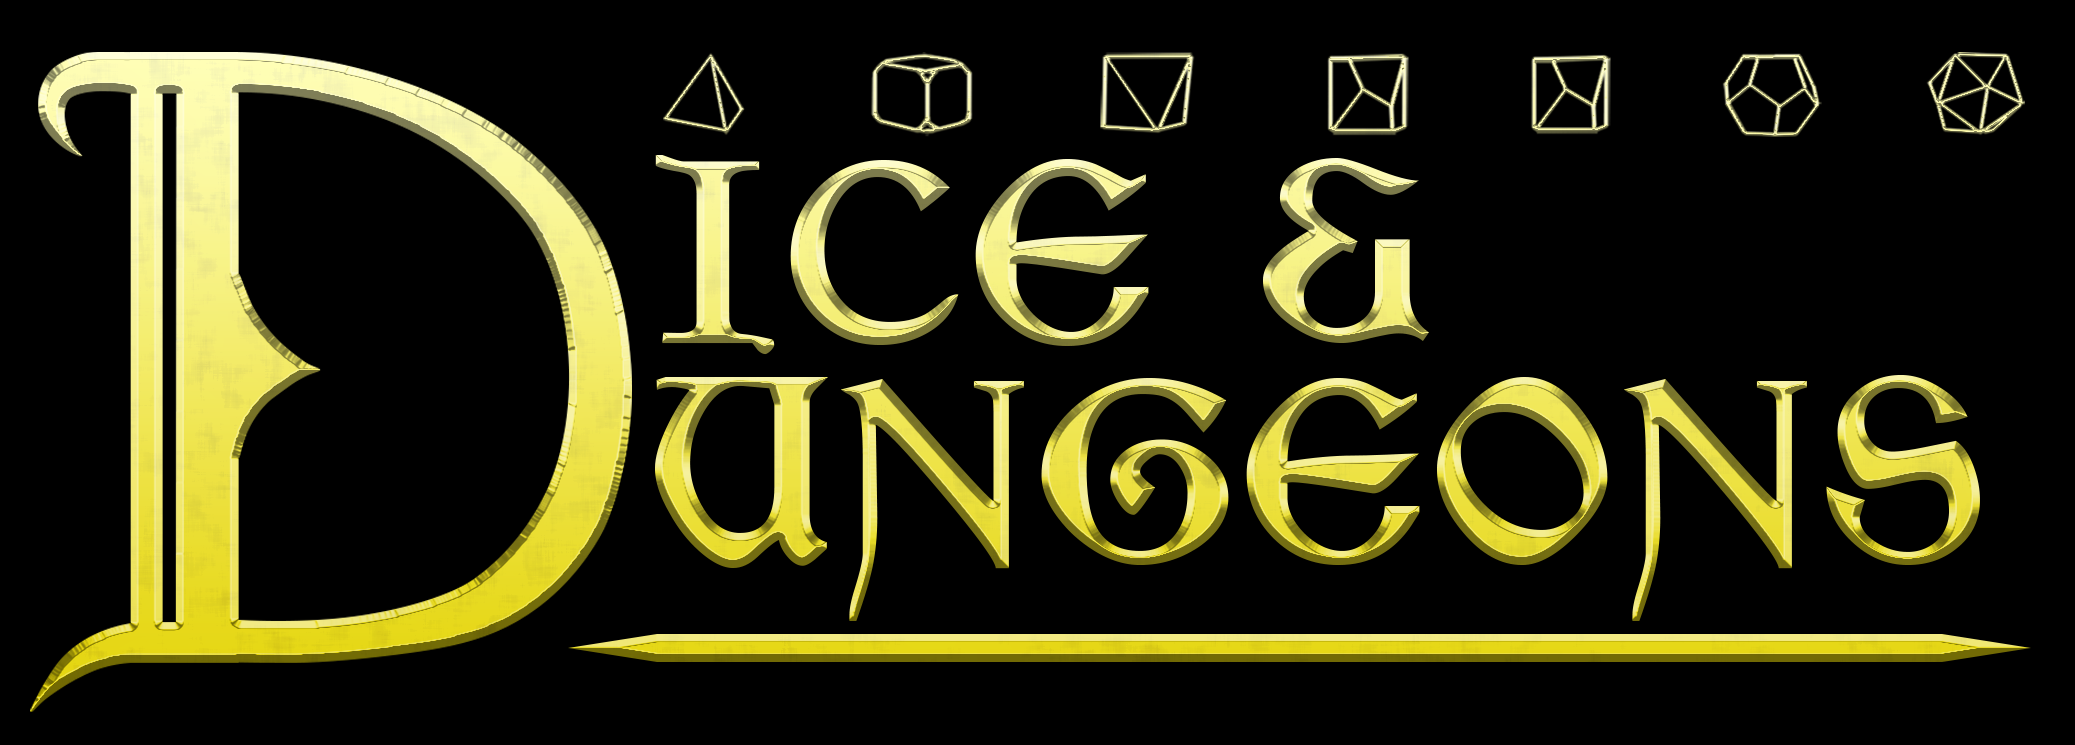 Dice and Dungeons